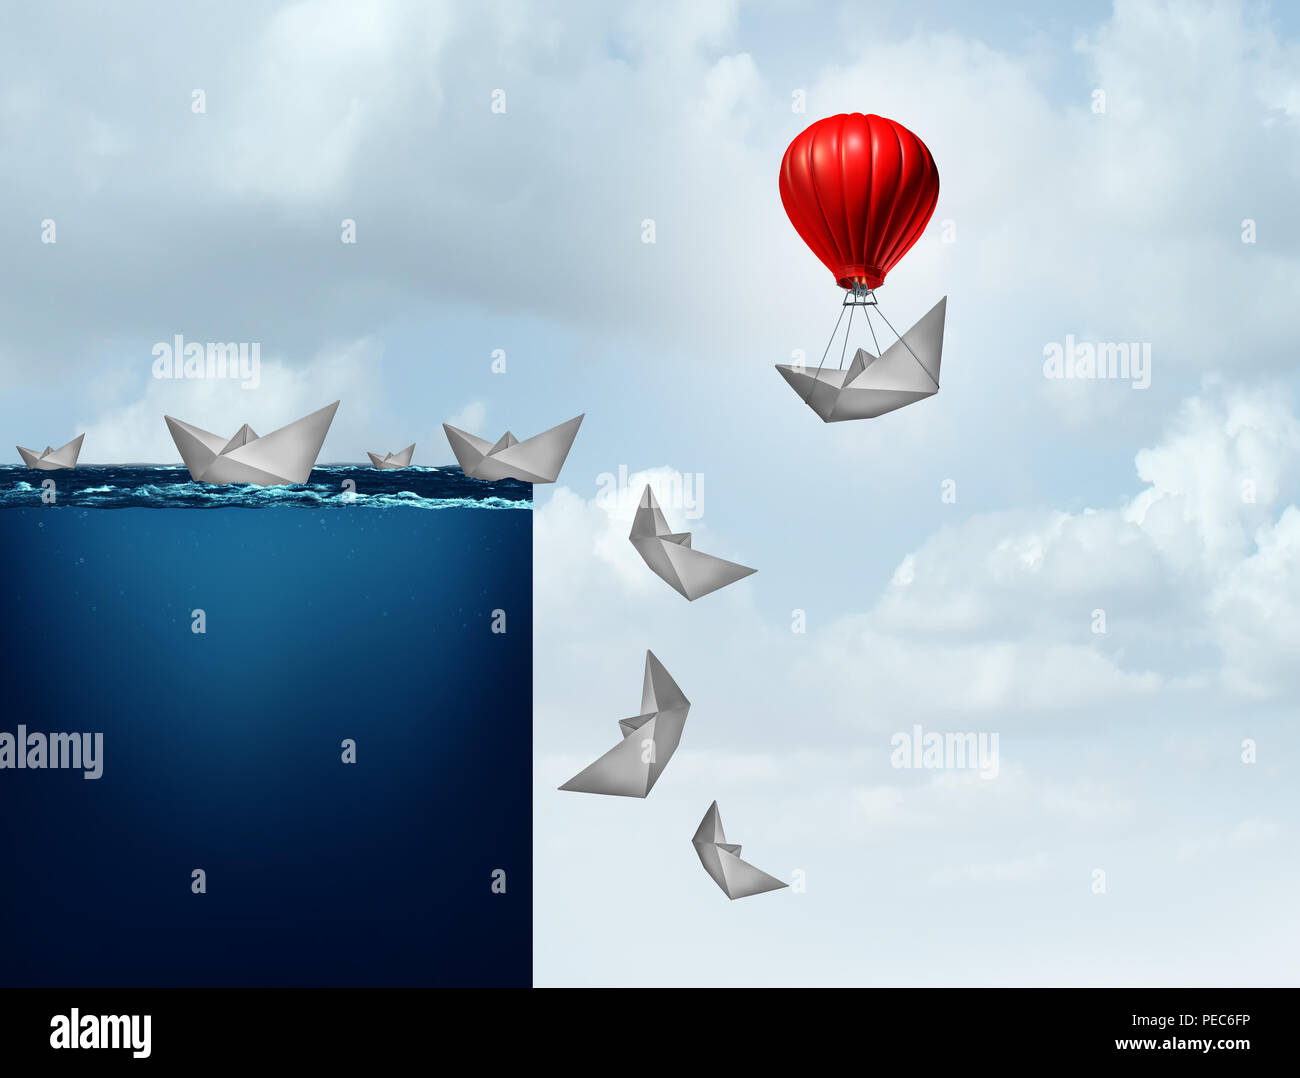 Business insurance plan and corporate liability protection concept as a paper boat lifted away from doom with 3D illustration elements. Stock Photo